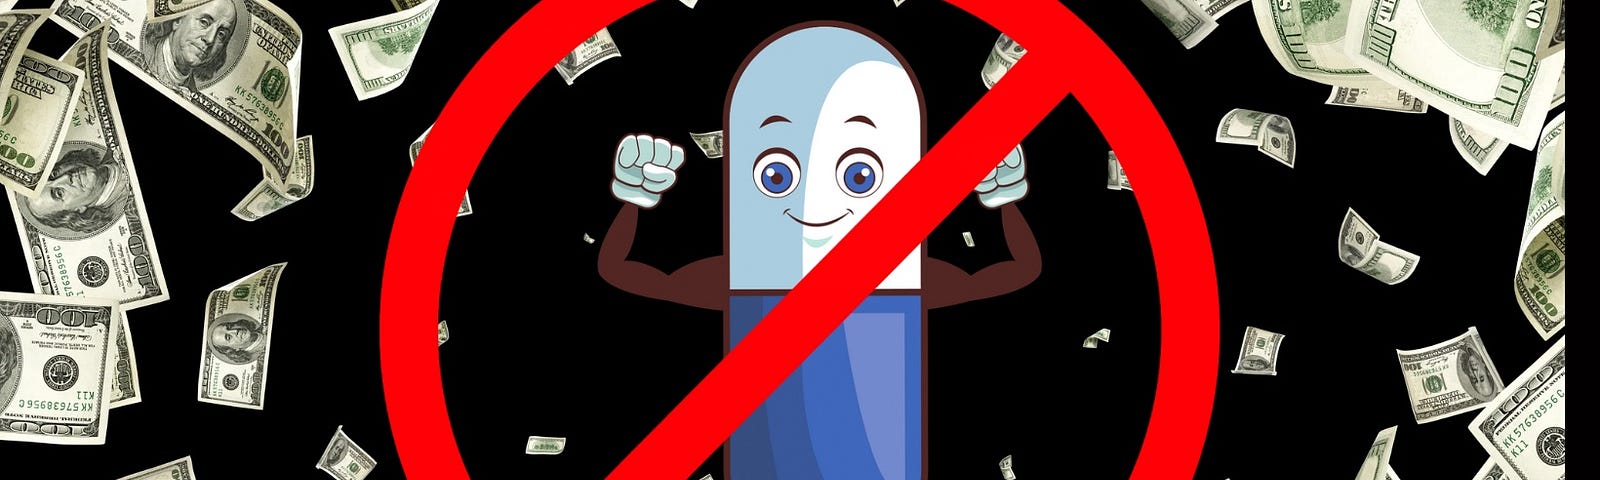 A cartoon of a pill with eyes, arms, and legs with a slashed circle “no” symbol over it standing in a warm of $100 bills.